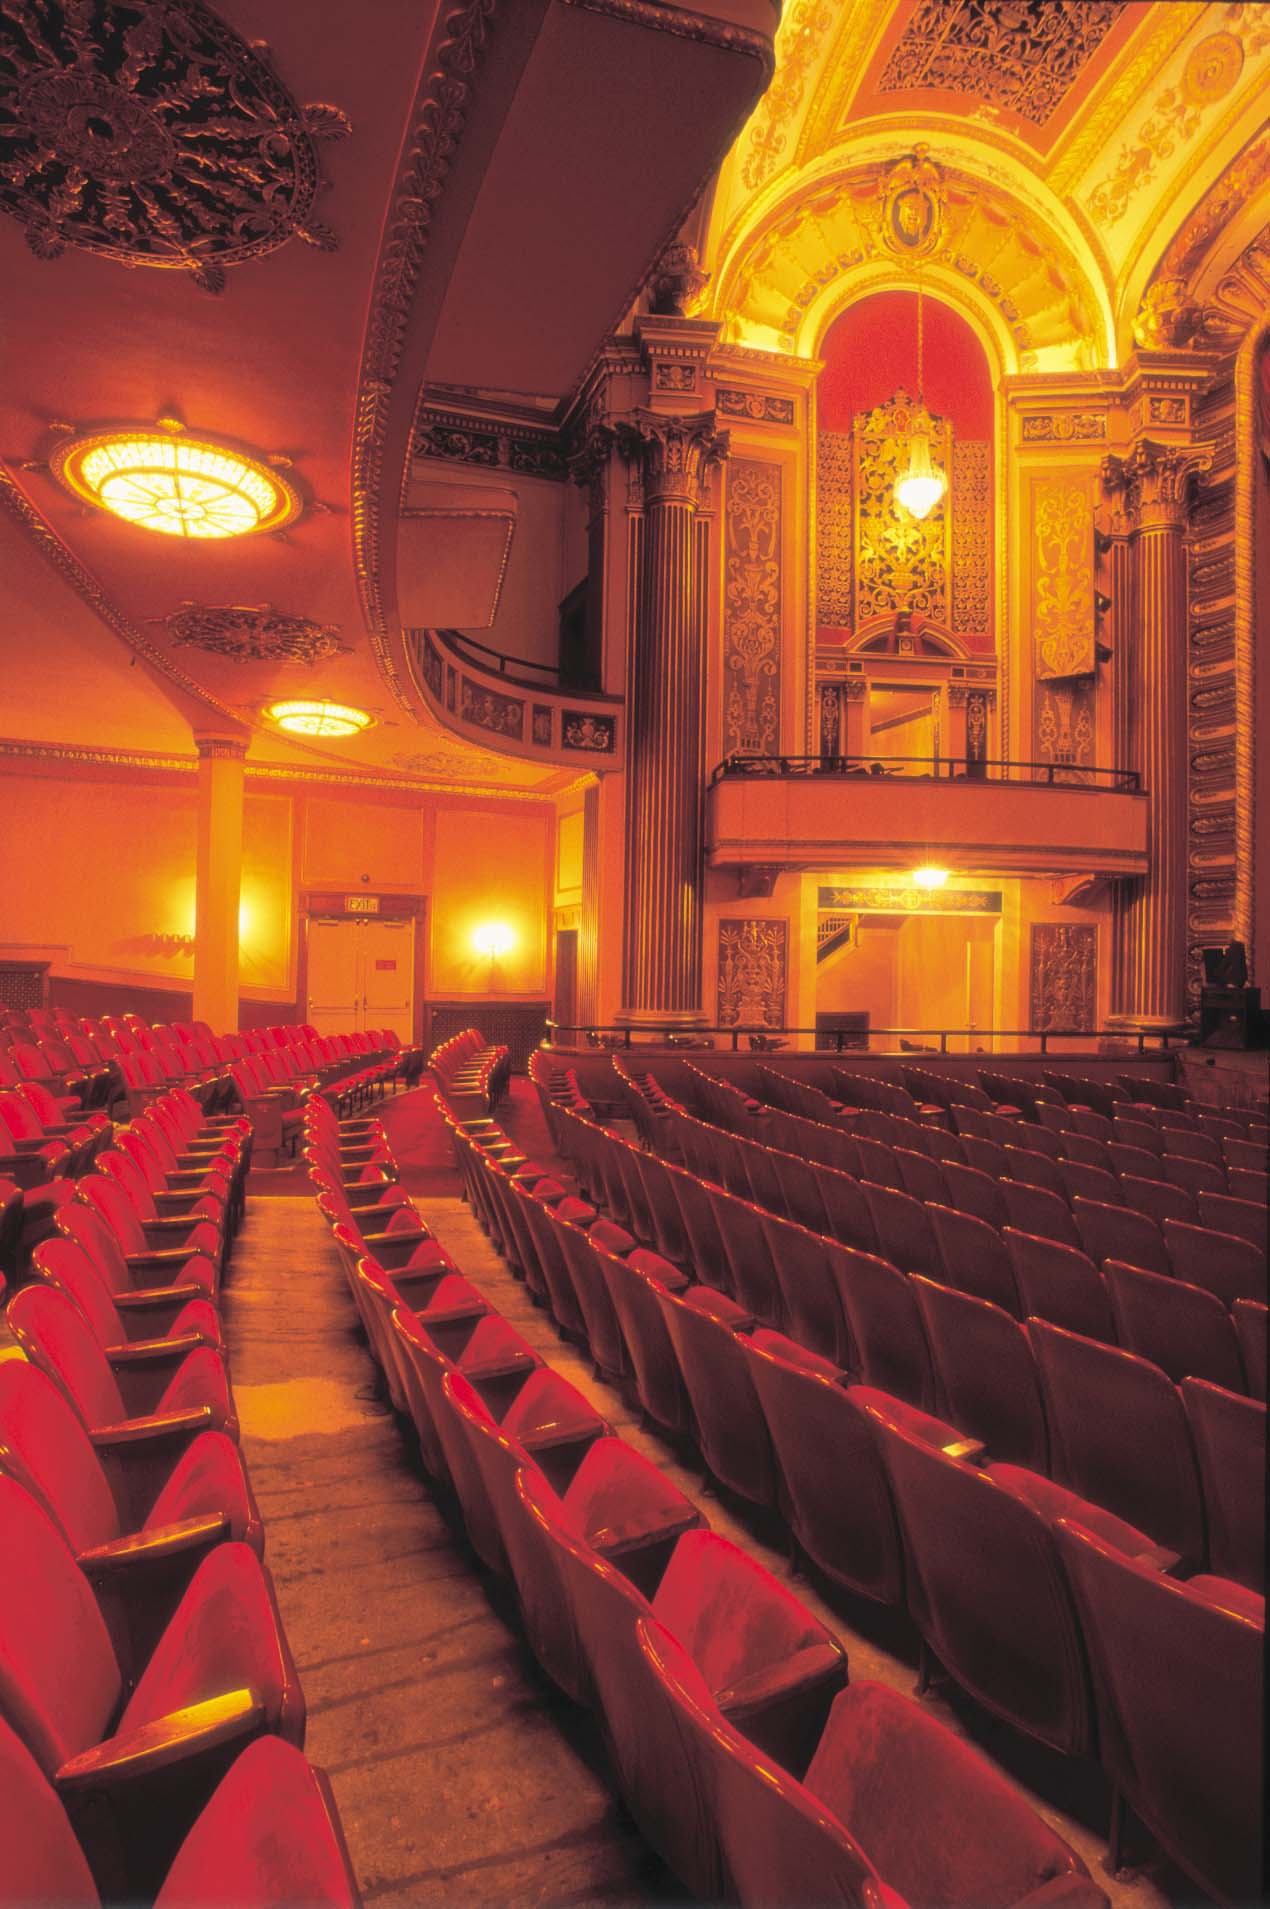 Rows of red theatre chairs curve into the gorgeous, golden walls and ceilings of The Strand Theatre.